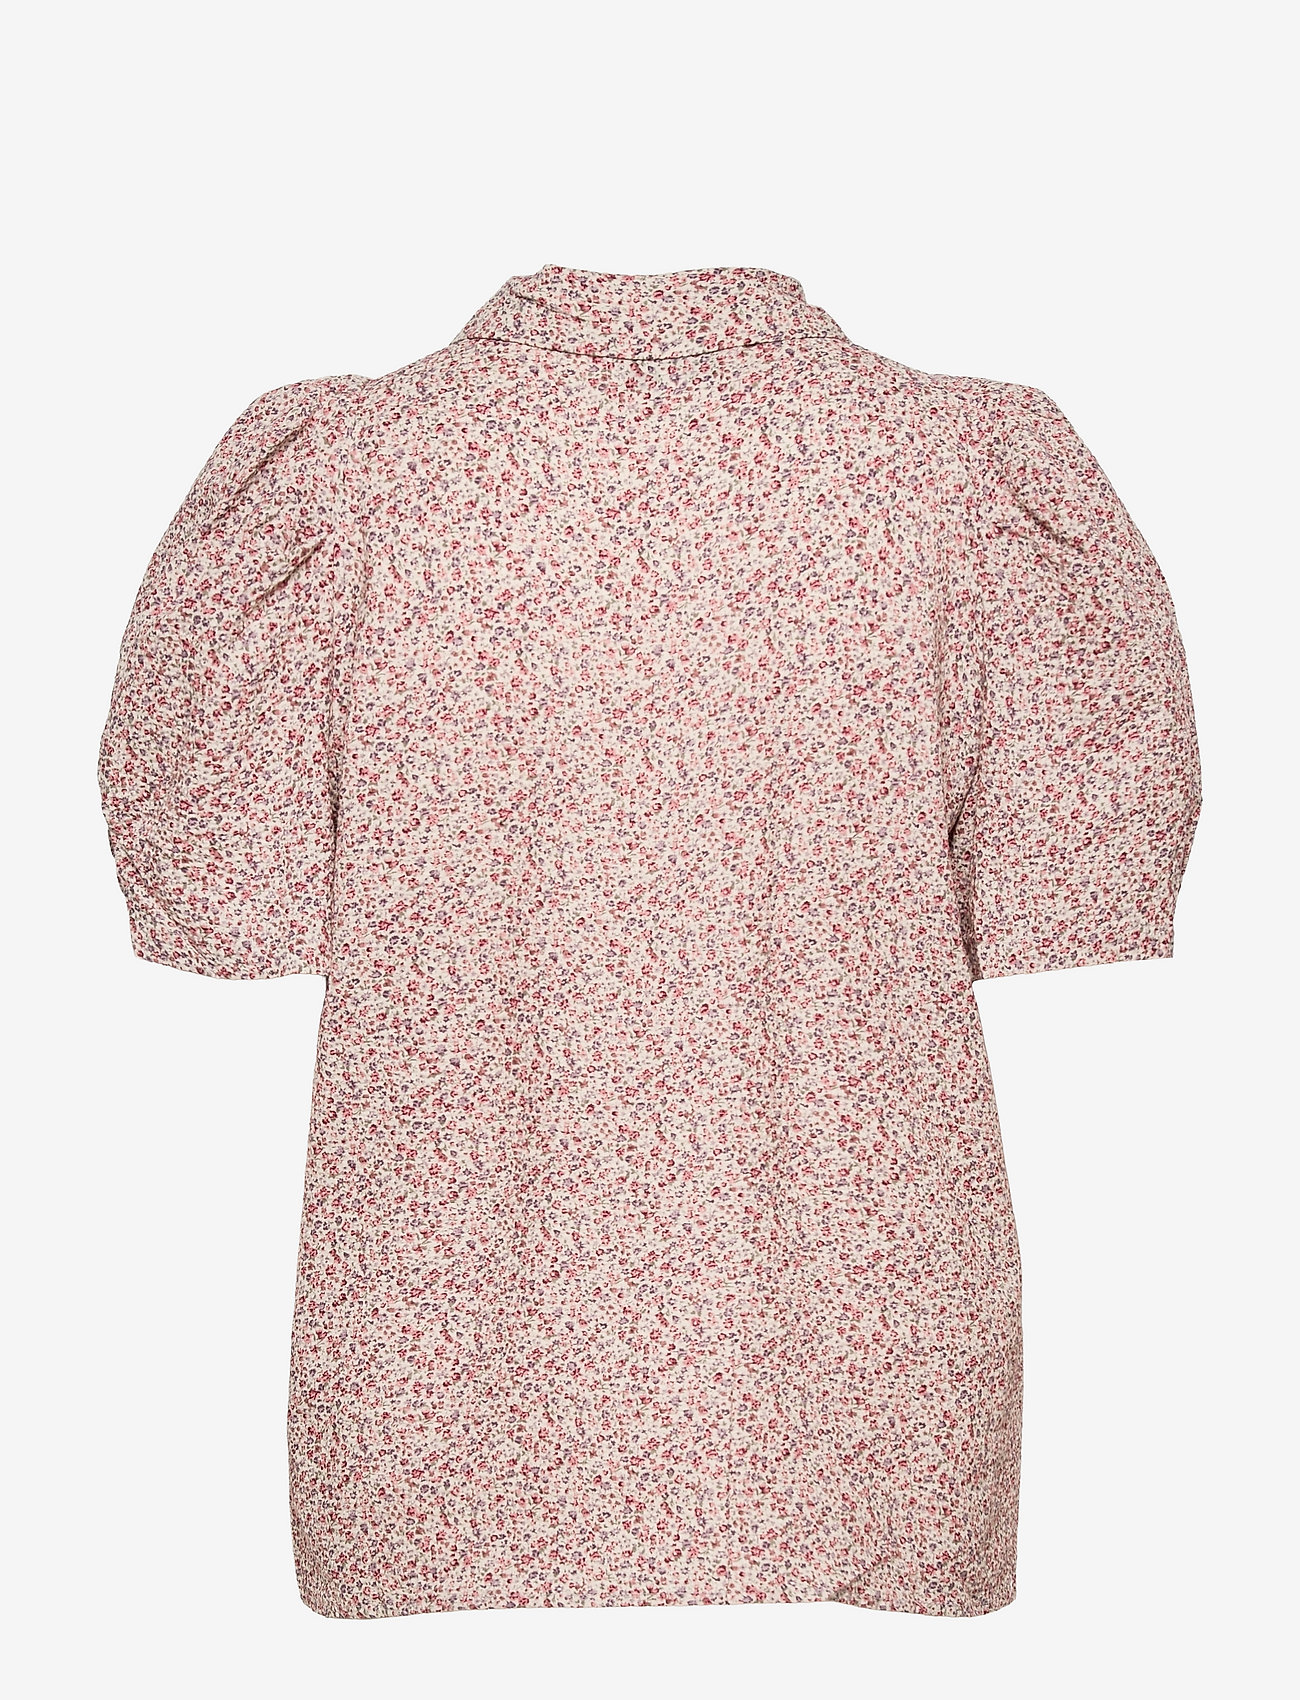 Lollys Laundry - Aby Shirt - short-sleeved blouses - 36 dusty rose - 1